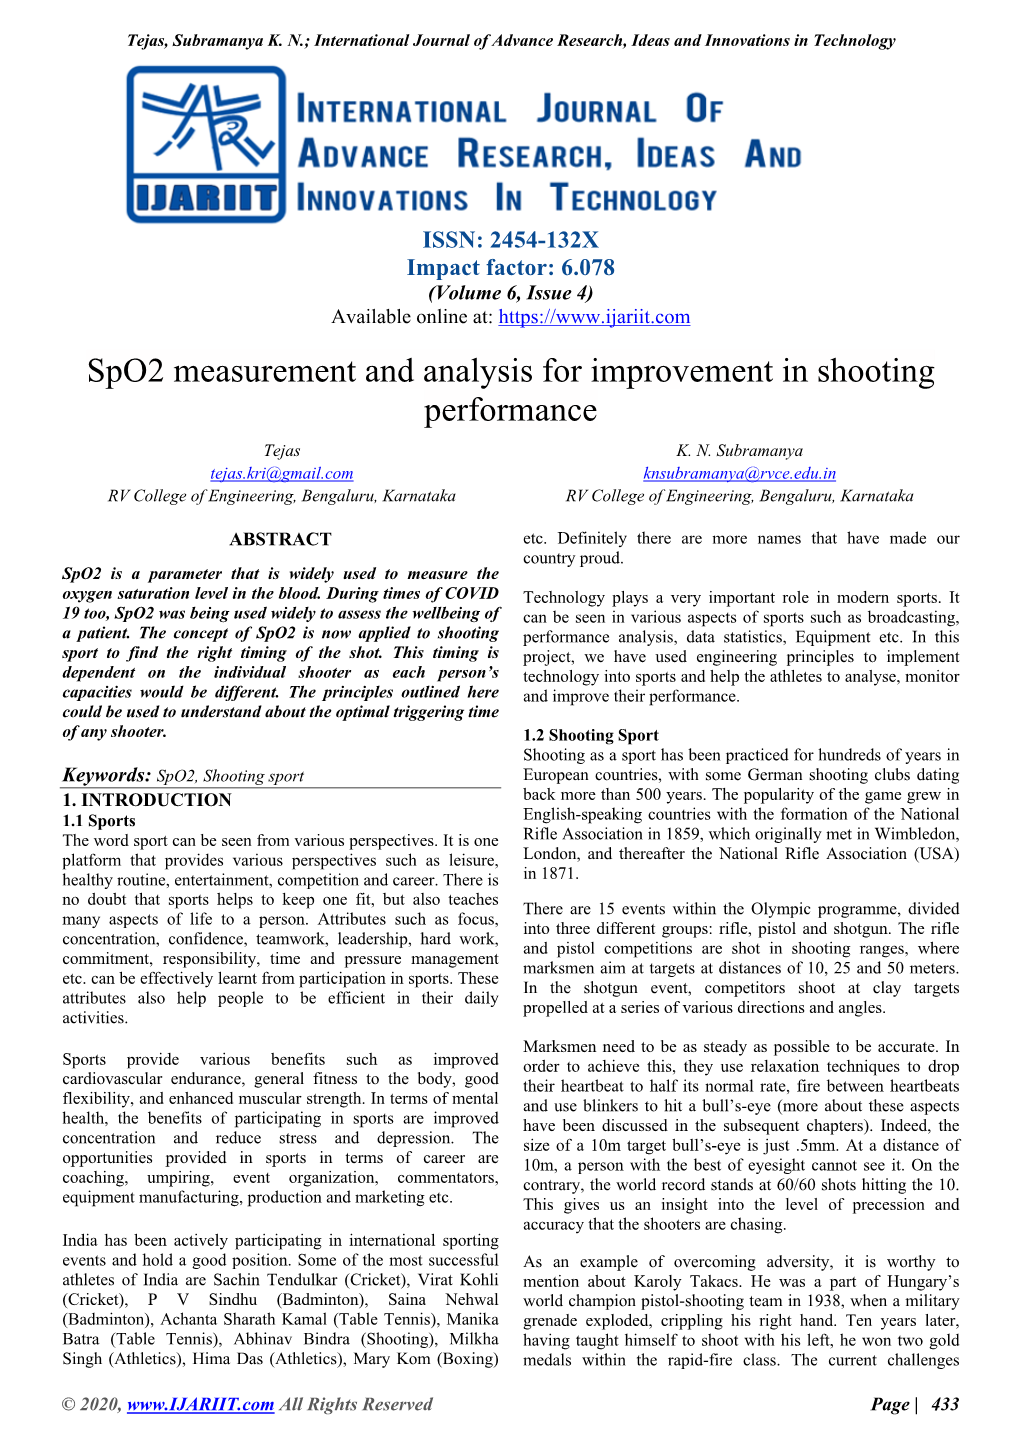 Spo2 Measurement and Analysis for Improvement in Shooting Performance